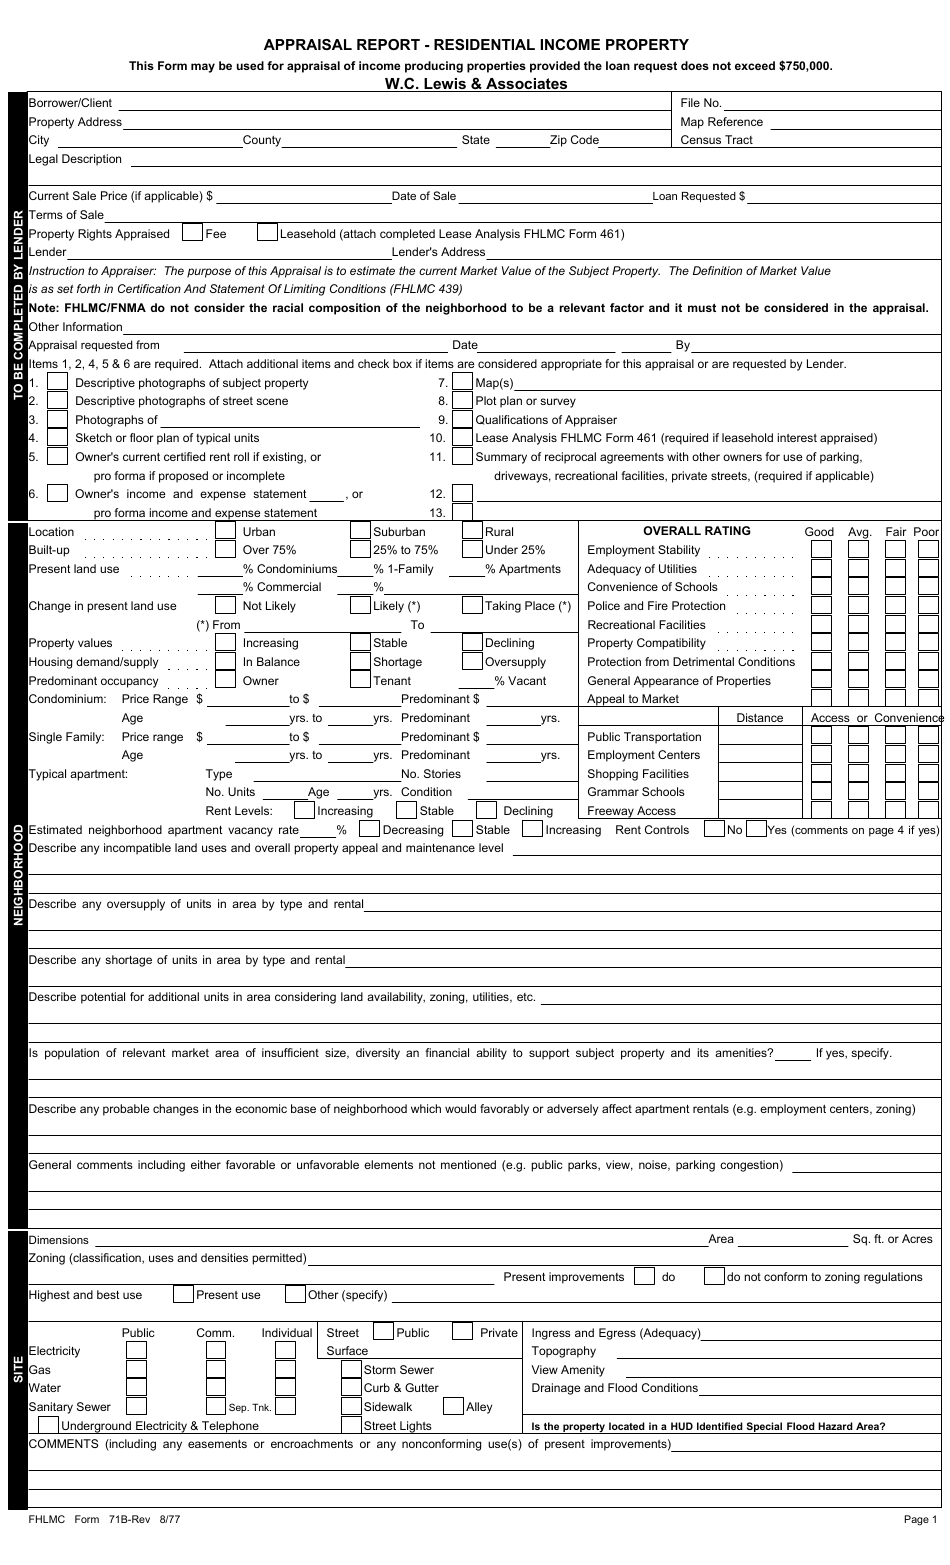 Fannie Mae Form 71B Appraisal Report - Residential Income Property, Page 1